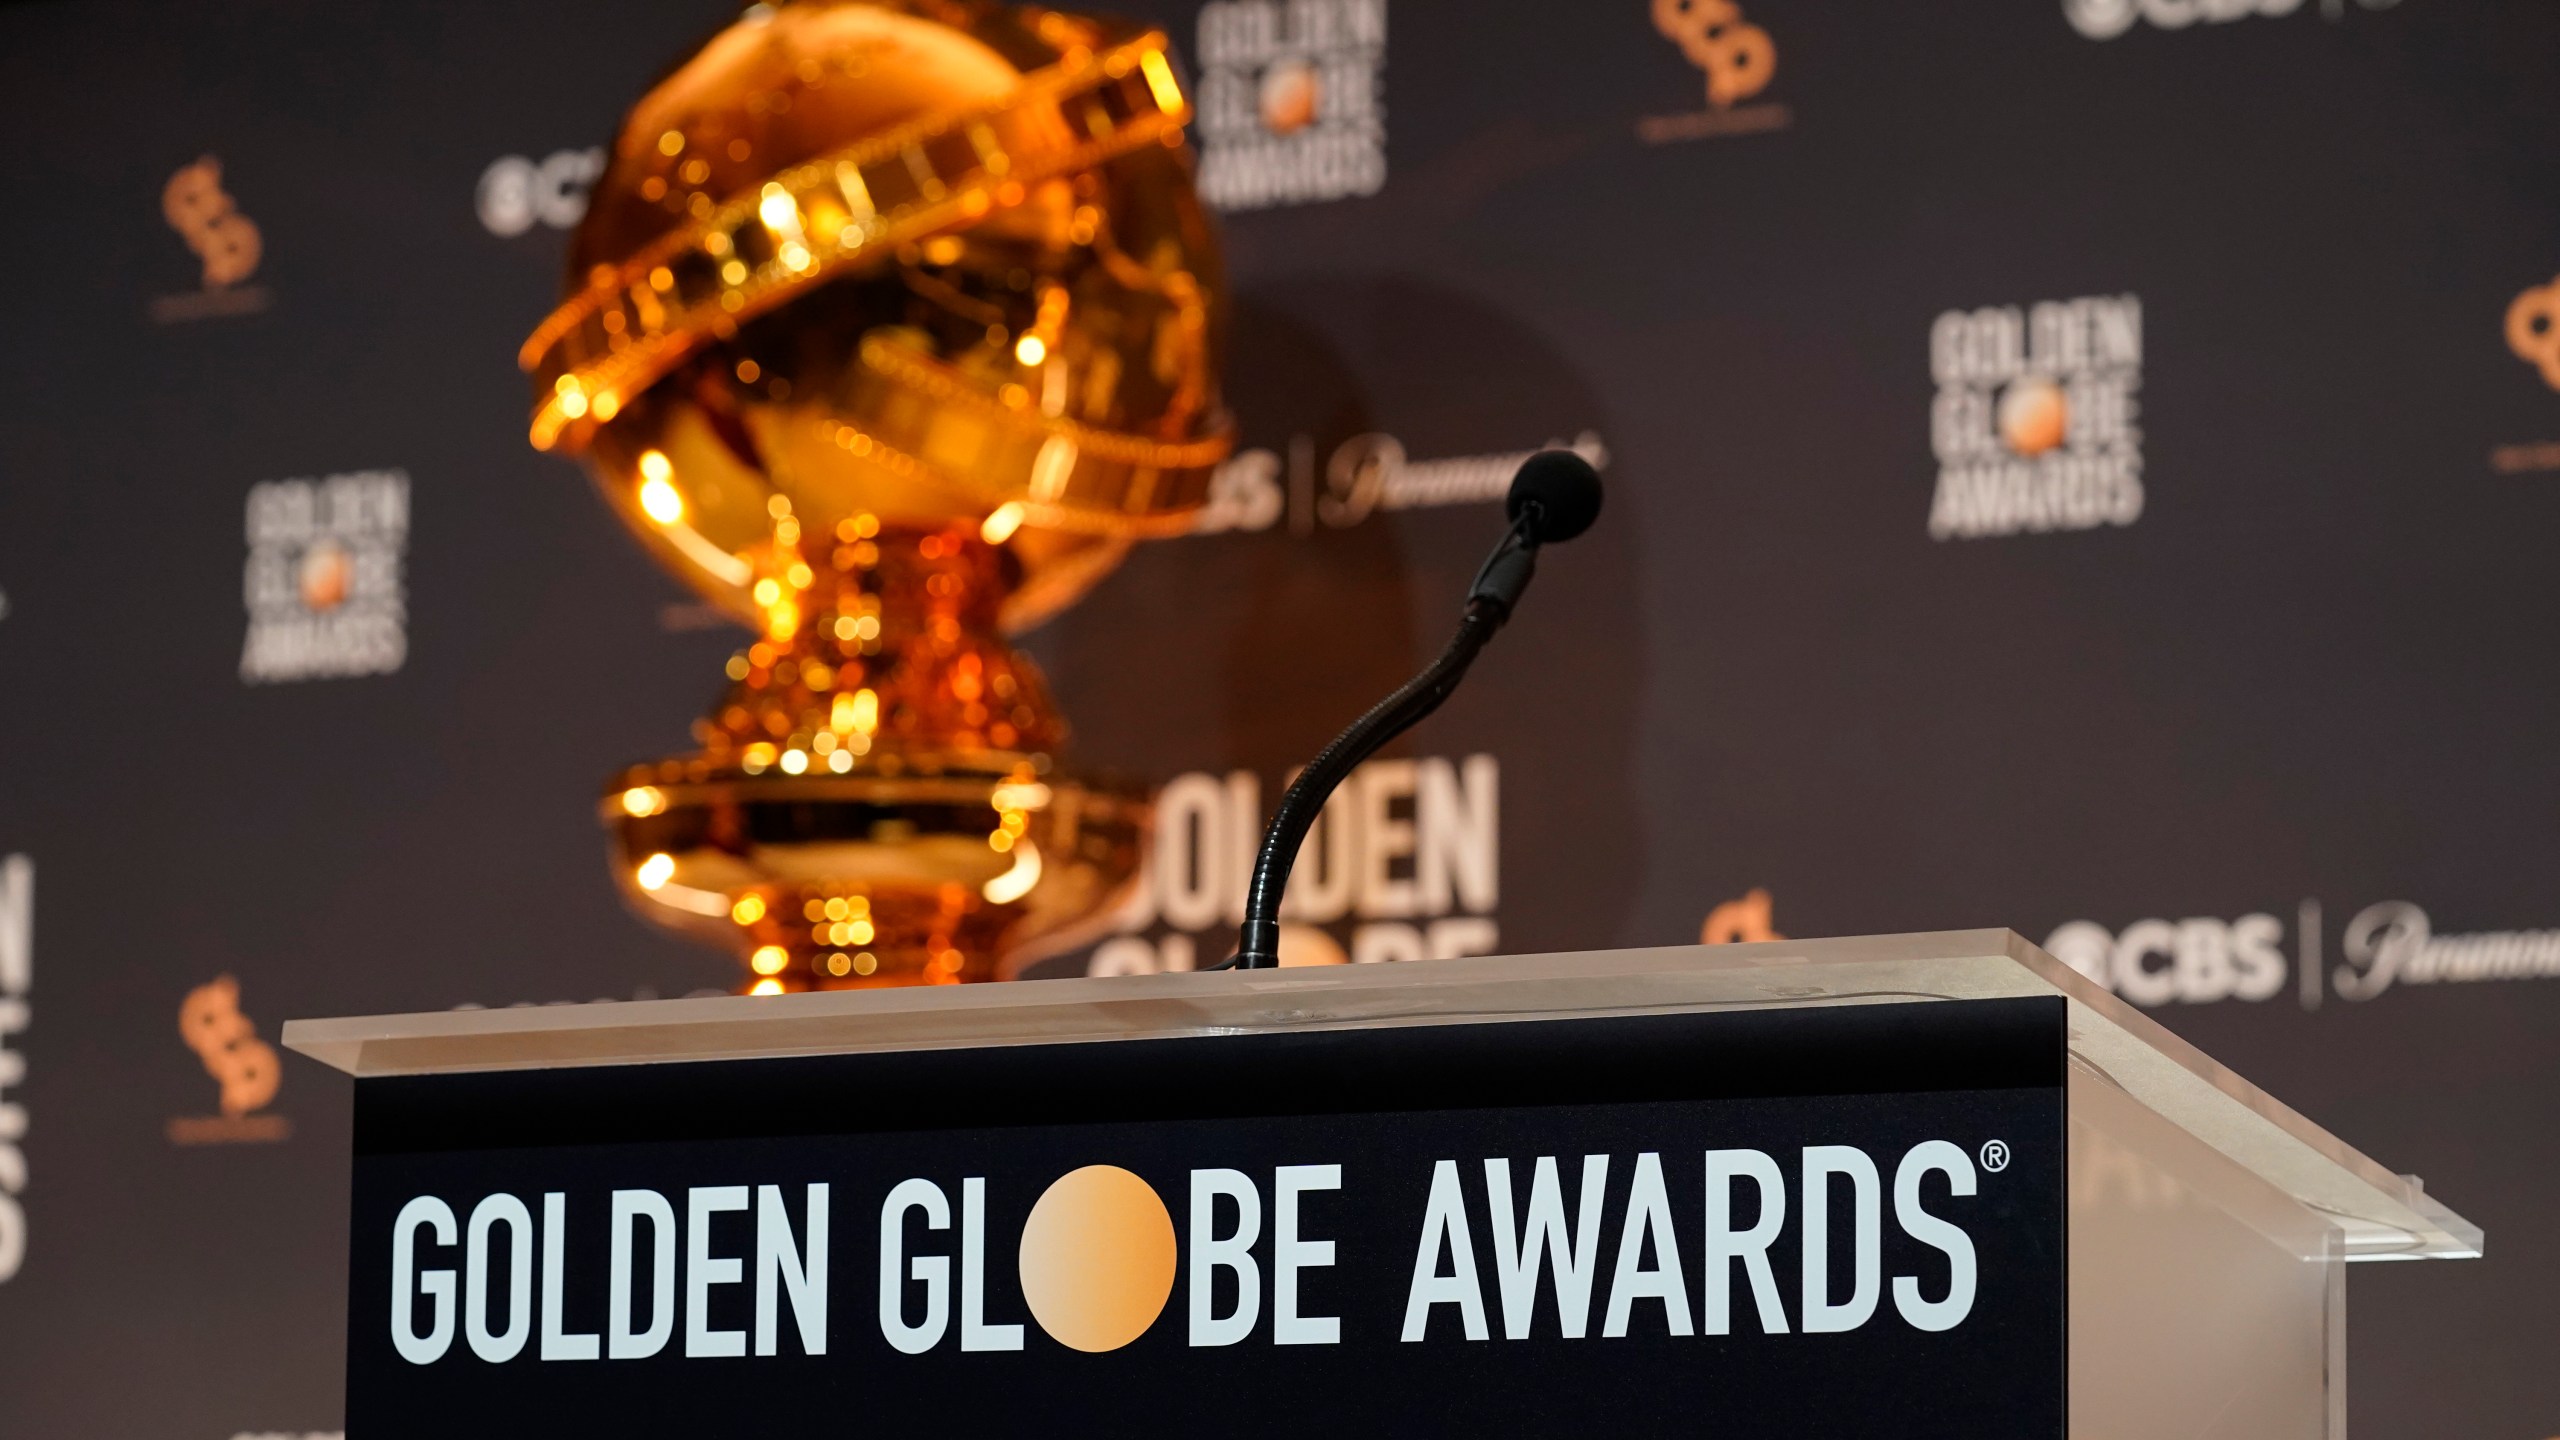 A replica of a Golden Globe statue appear behind the podium at the nominations for the 81st Golden Globe Awards at the Beverly Hilton Hotel on Monday, Dec. 11, 2023, in Beverly Hills, Calif. The 81st Golden Globe Awards will be held on Sunday, Jan. 7, 2024. (AP Photo/Chris Pizzello)